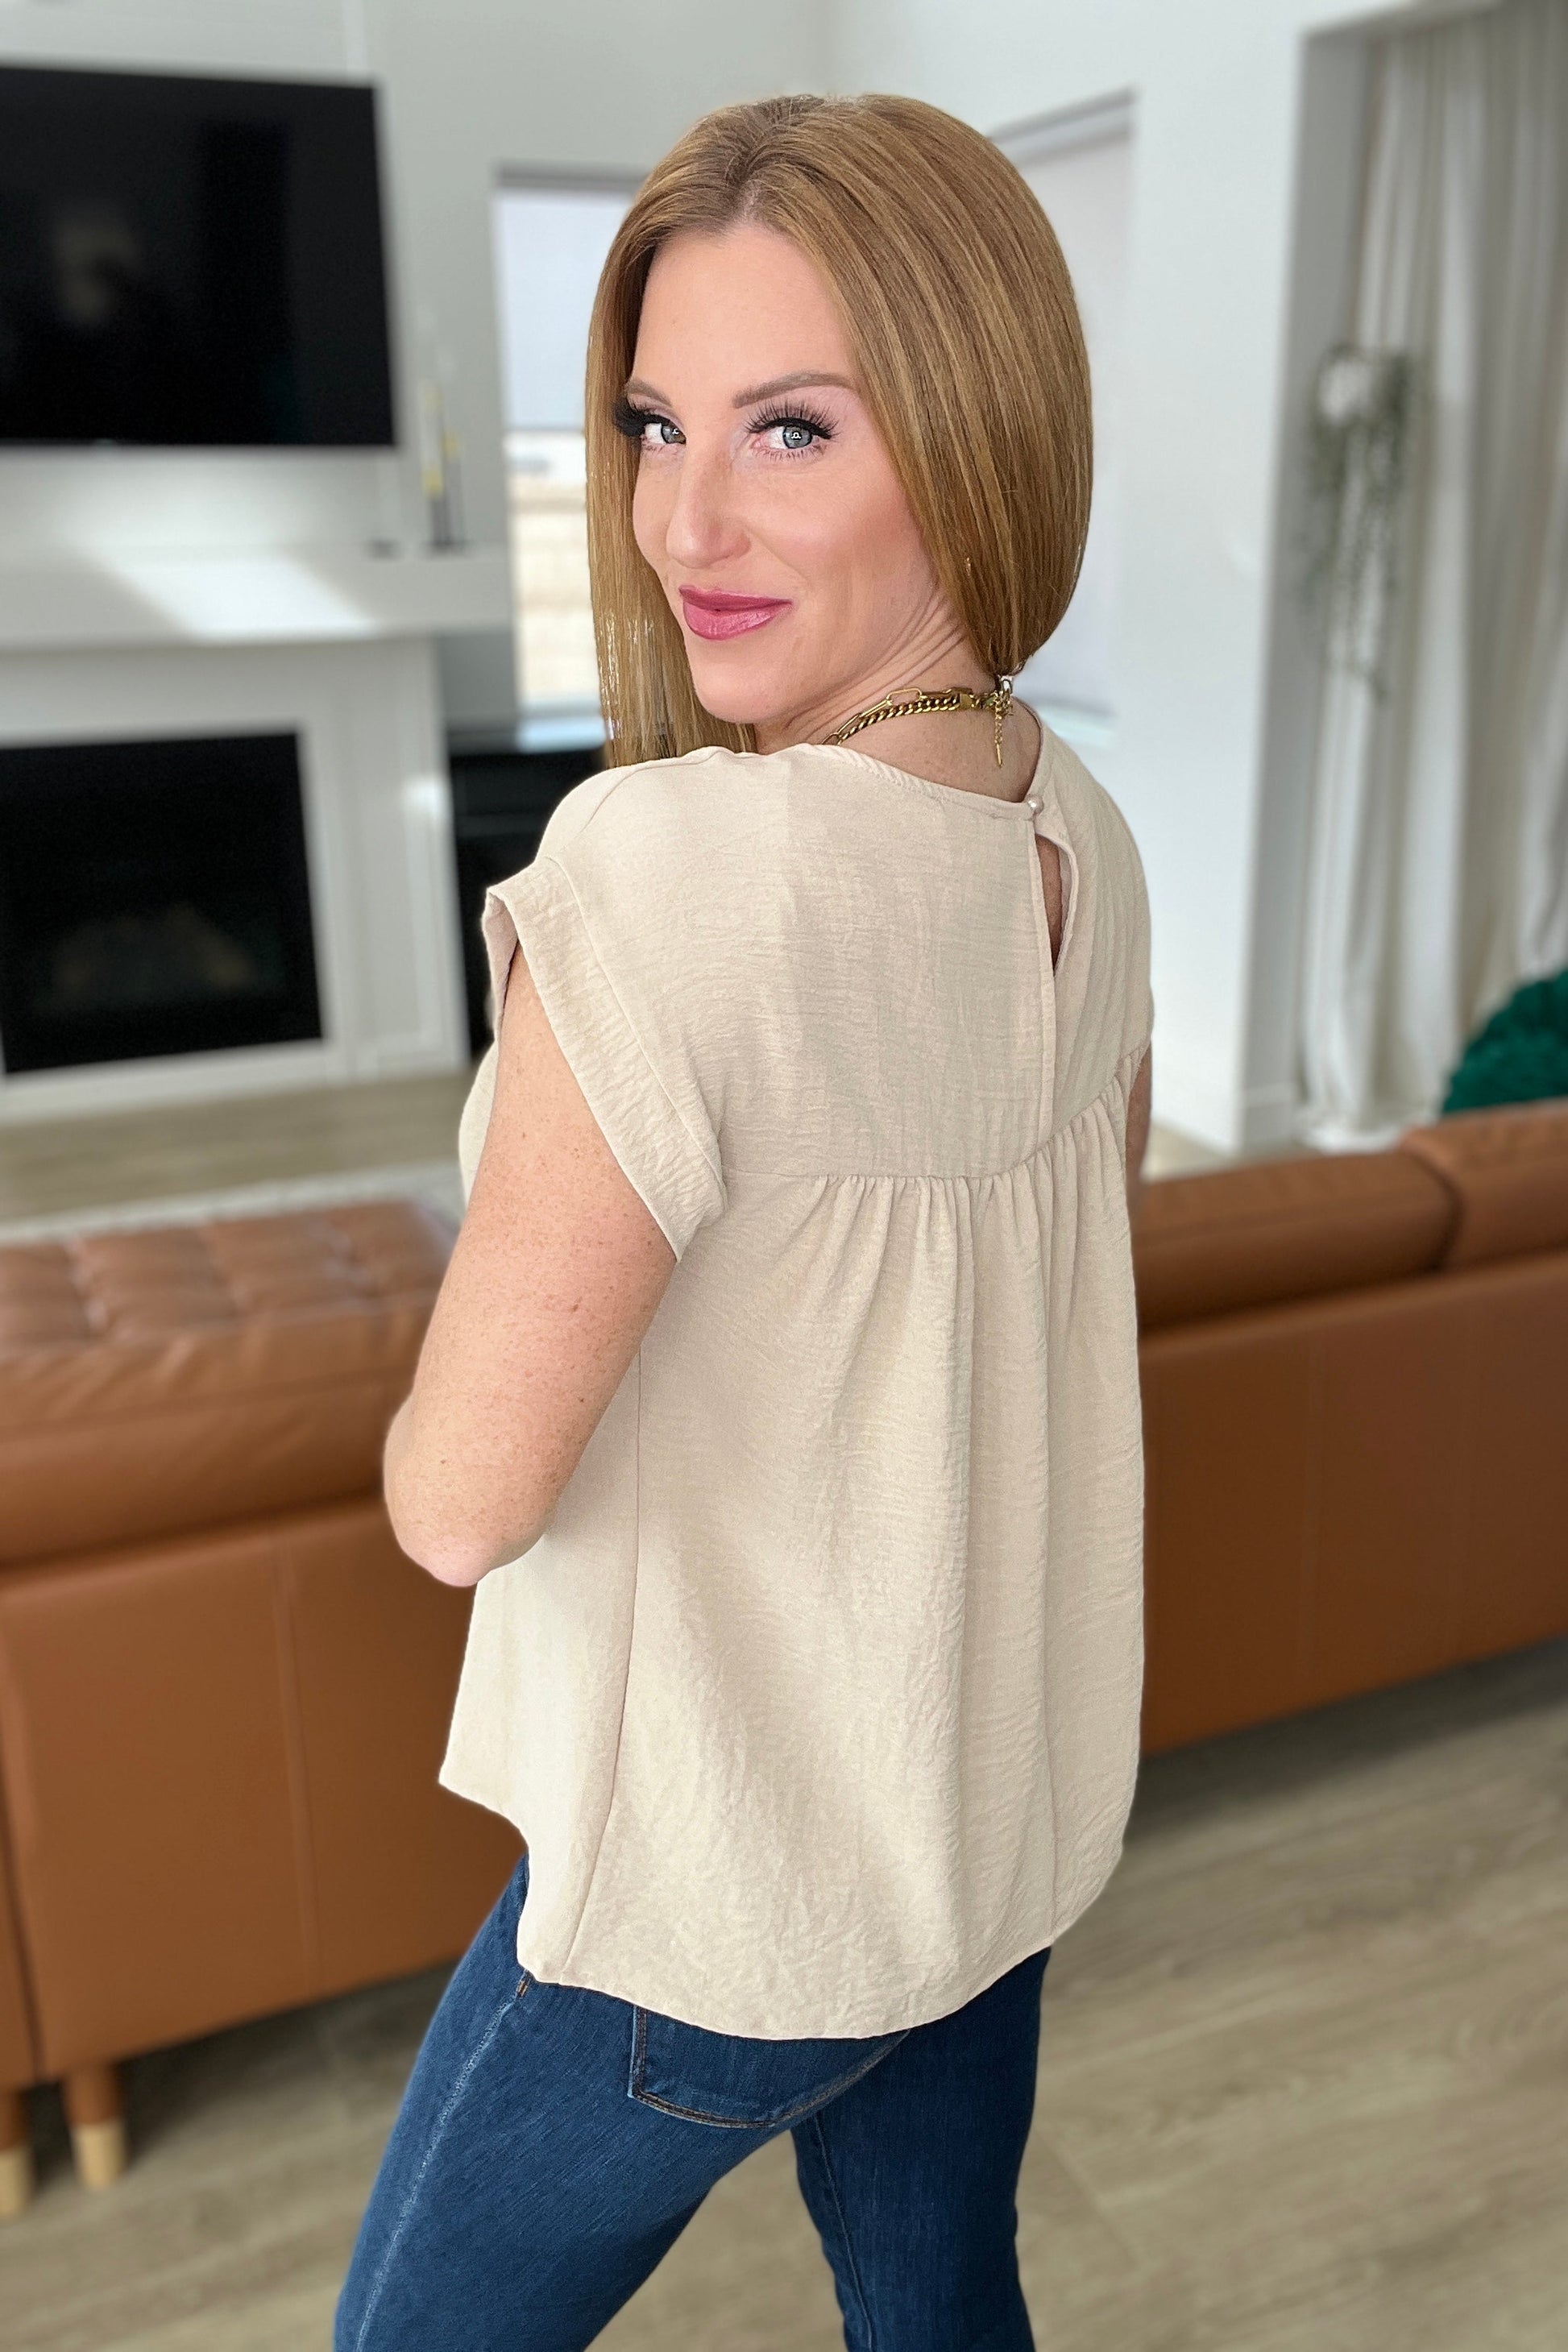 Airflow Babydoll Top in Taupe - Southern Divas Boutique